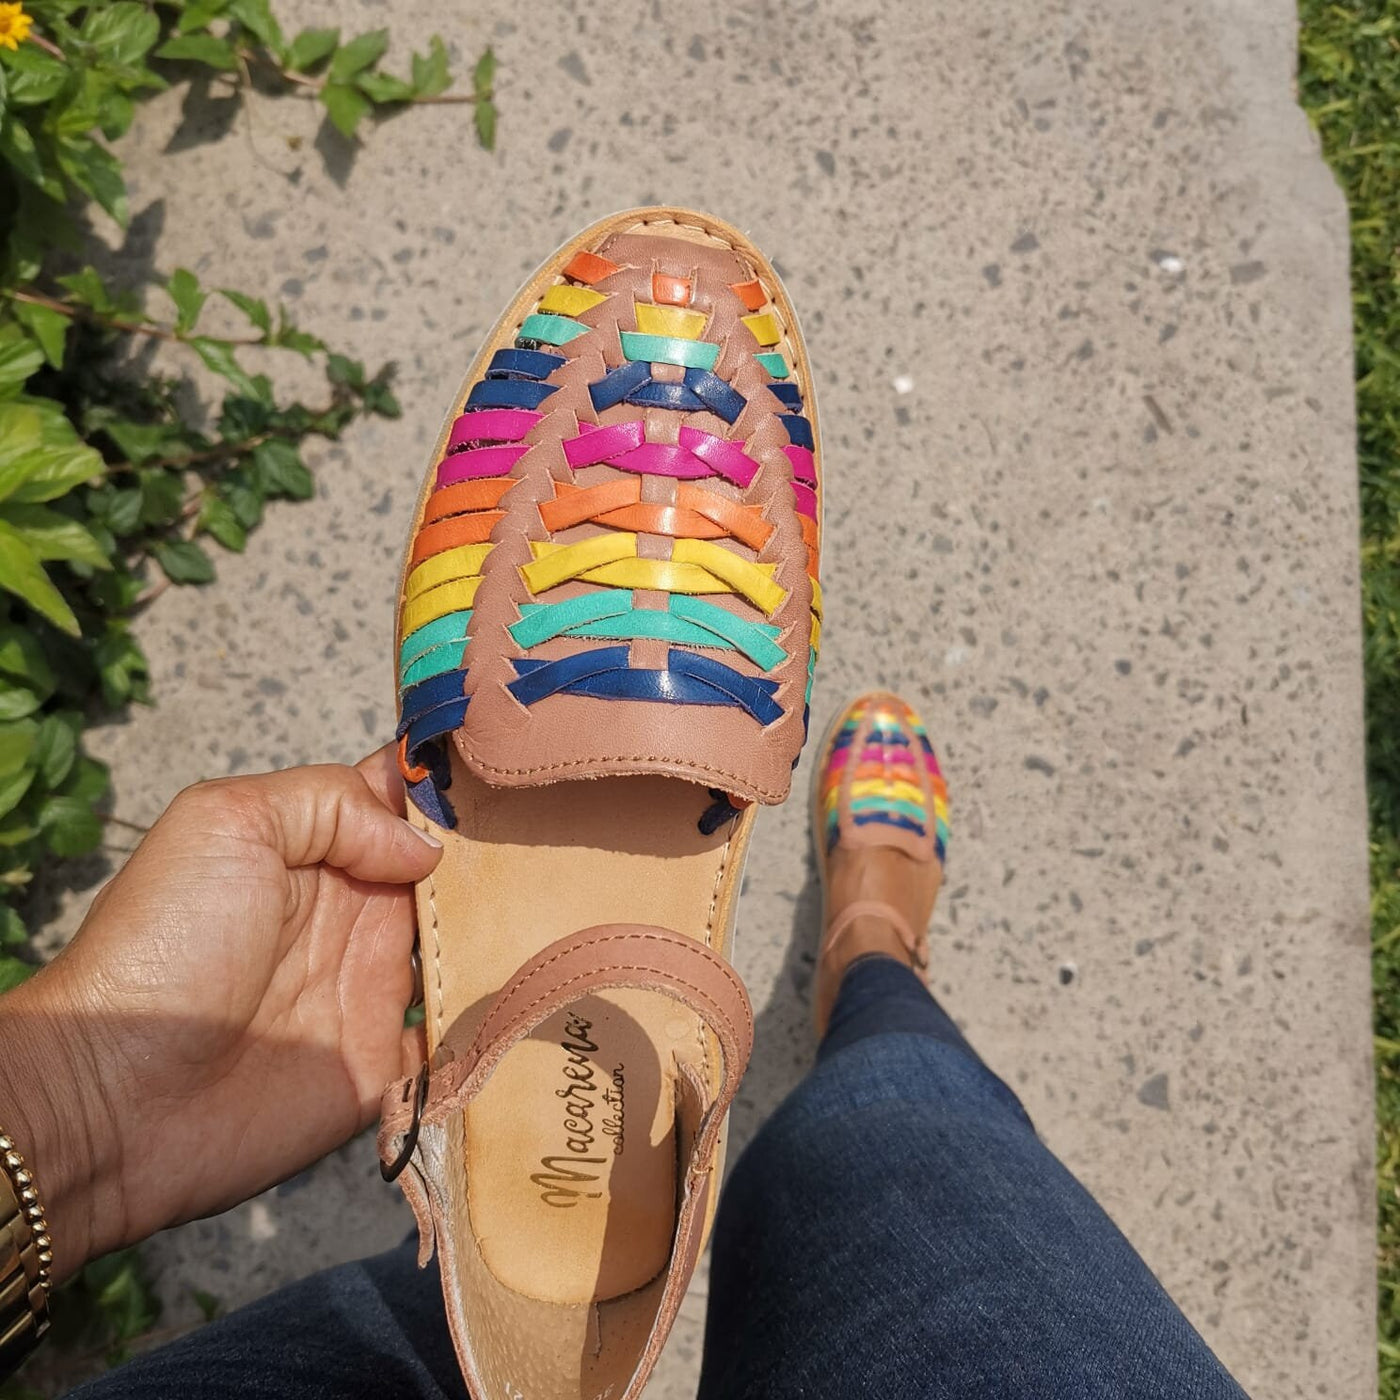 Tan Color Huarache Sandal Hippie Vintage Mexican Style Colorful Mexican Leather Huaraches